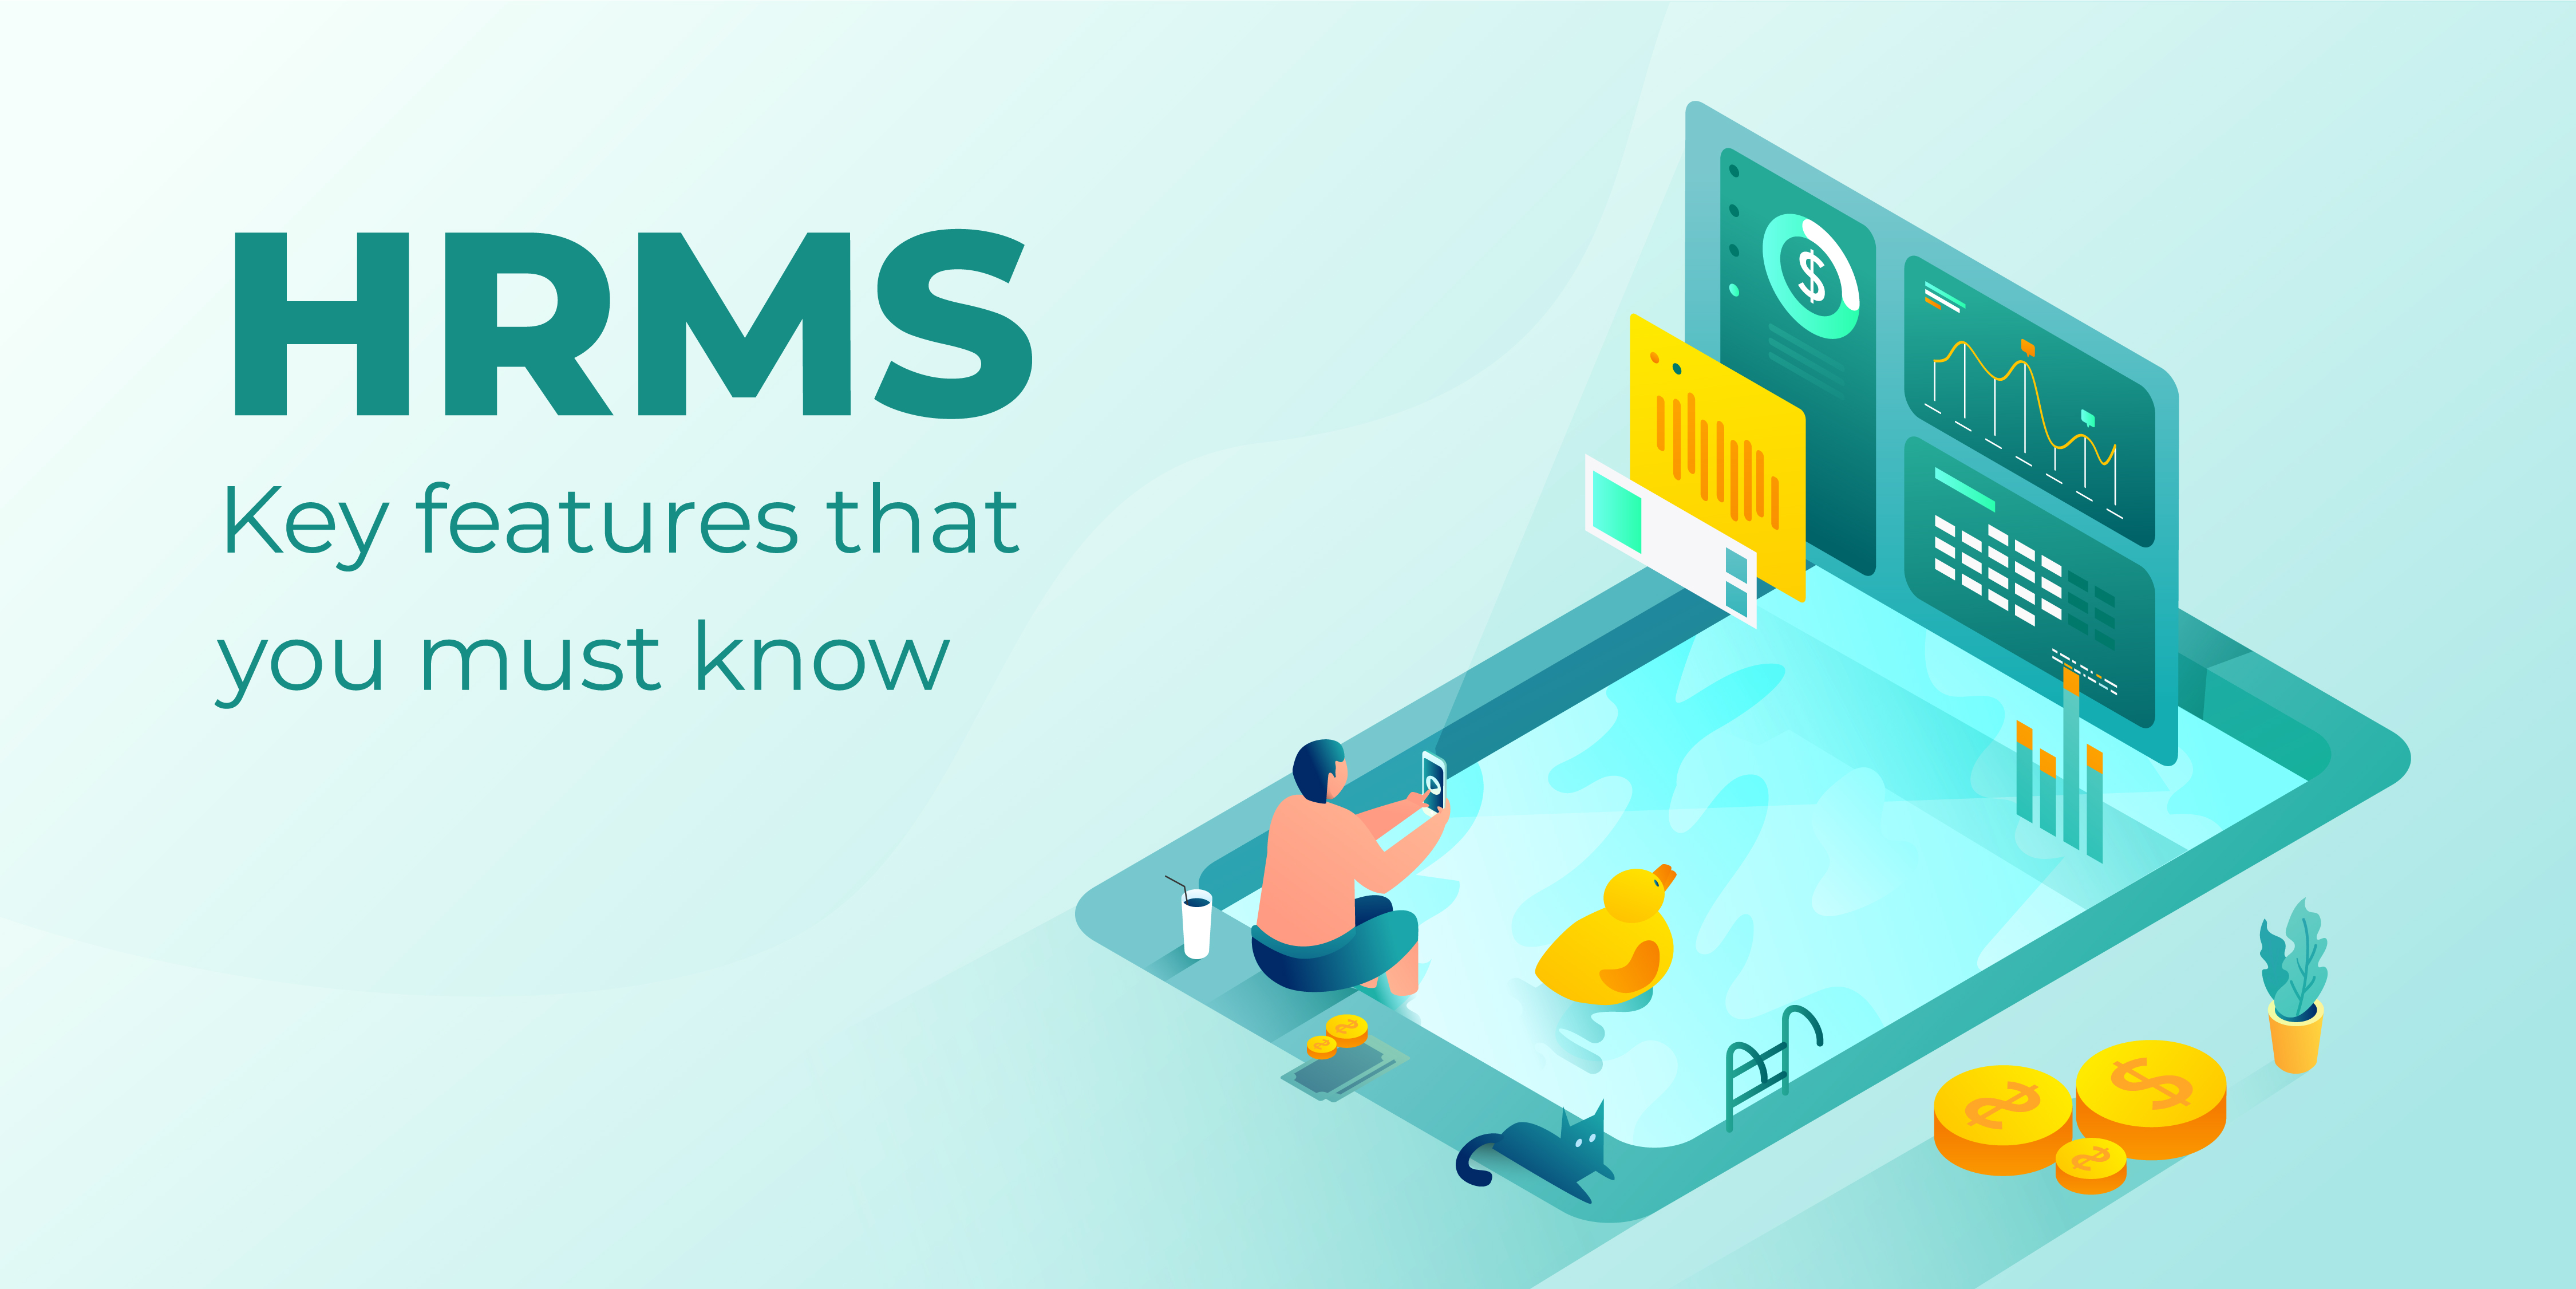 HRMS Key features that you must know